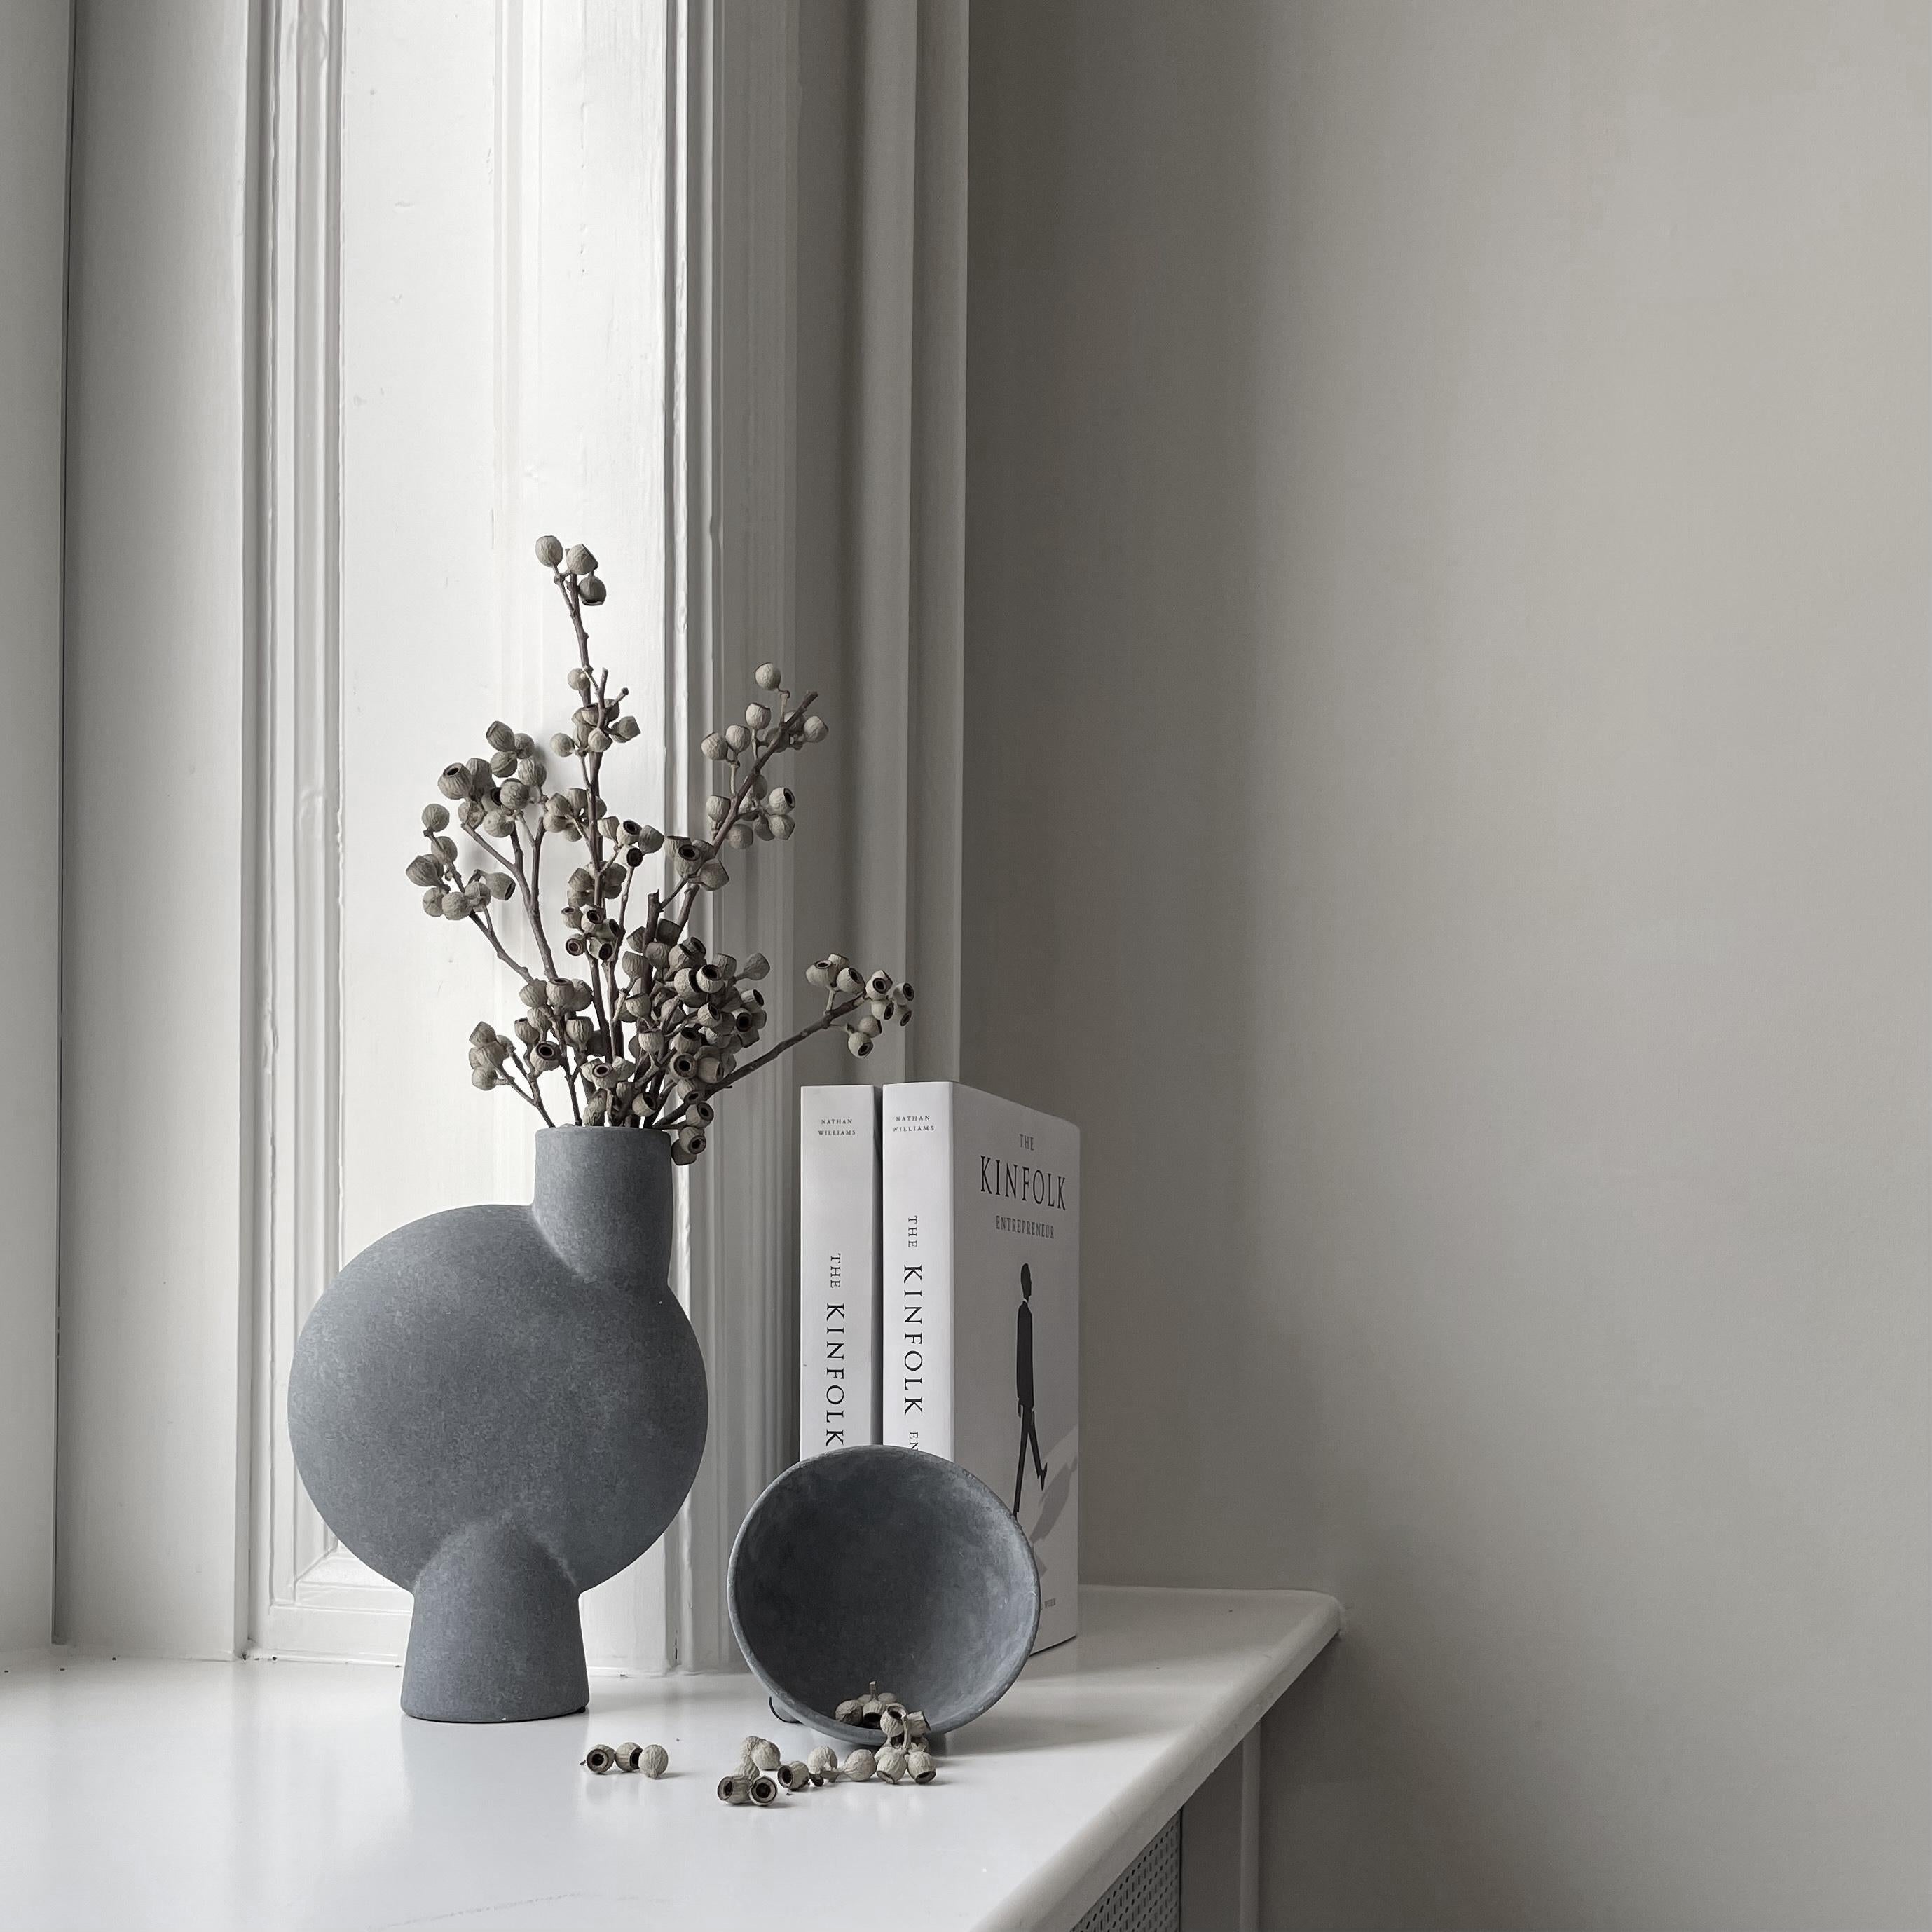 A set of 4 dark grey Medio sphere vase Bubl by 101 Copenhagen
Designed by Kristian Sofus Hansen & Tommy Hyldahl
Dimensions: L18 / W8 / H26 CM
Materials: Ceramic

The Sphere collection celebrates unique silhouettes and textures that makes an